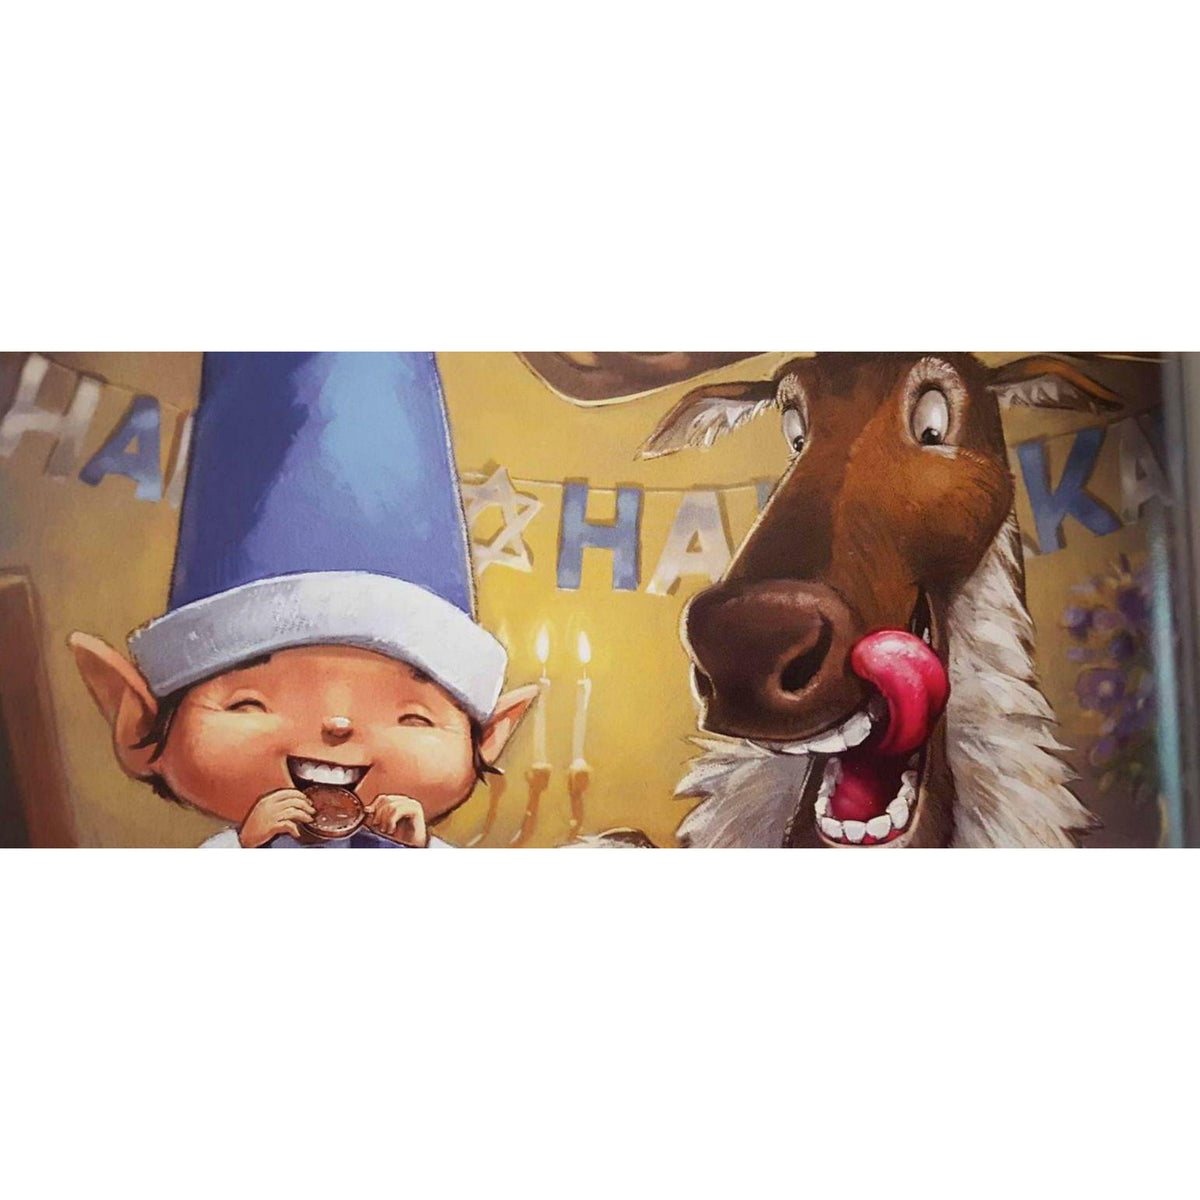 Shmelf the Hanukkah Elf | by Greg Wolfe, illustrated by Howard McWilliam-Arts &amp; Humanities-Macmillan Publishers-Yellow Springs Toy Company